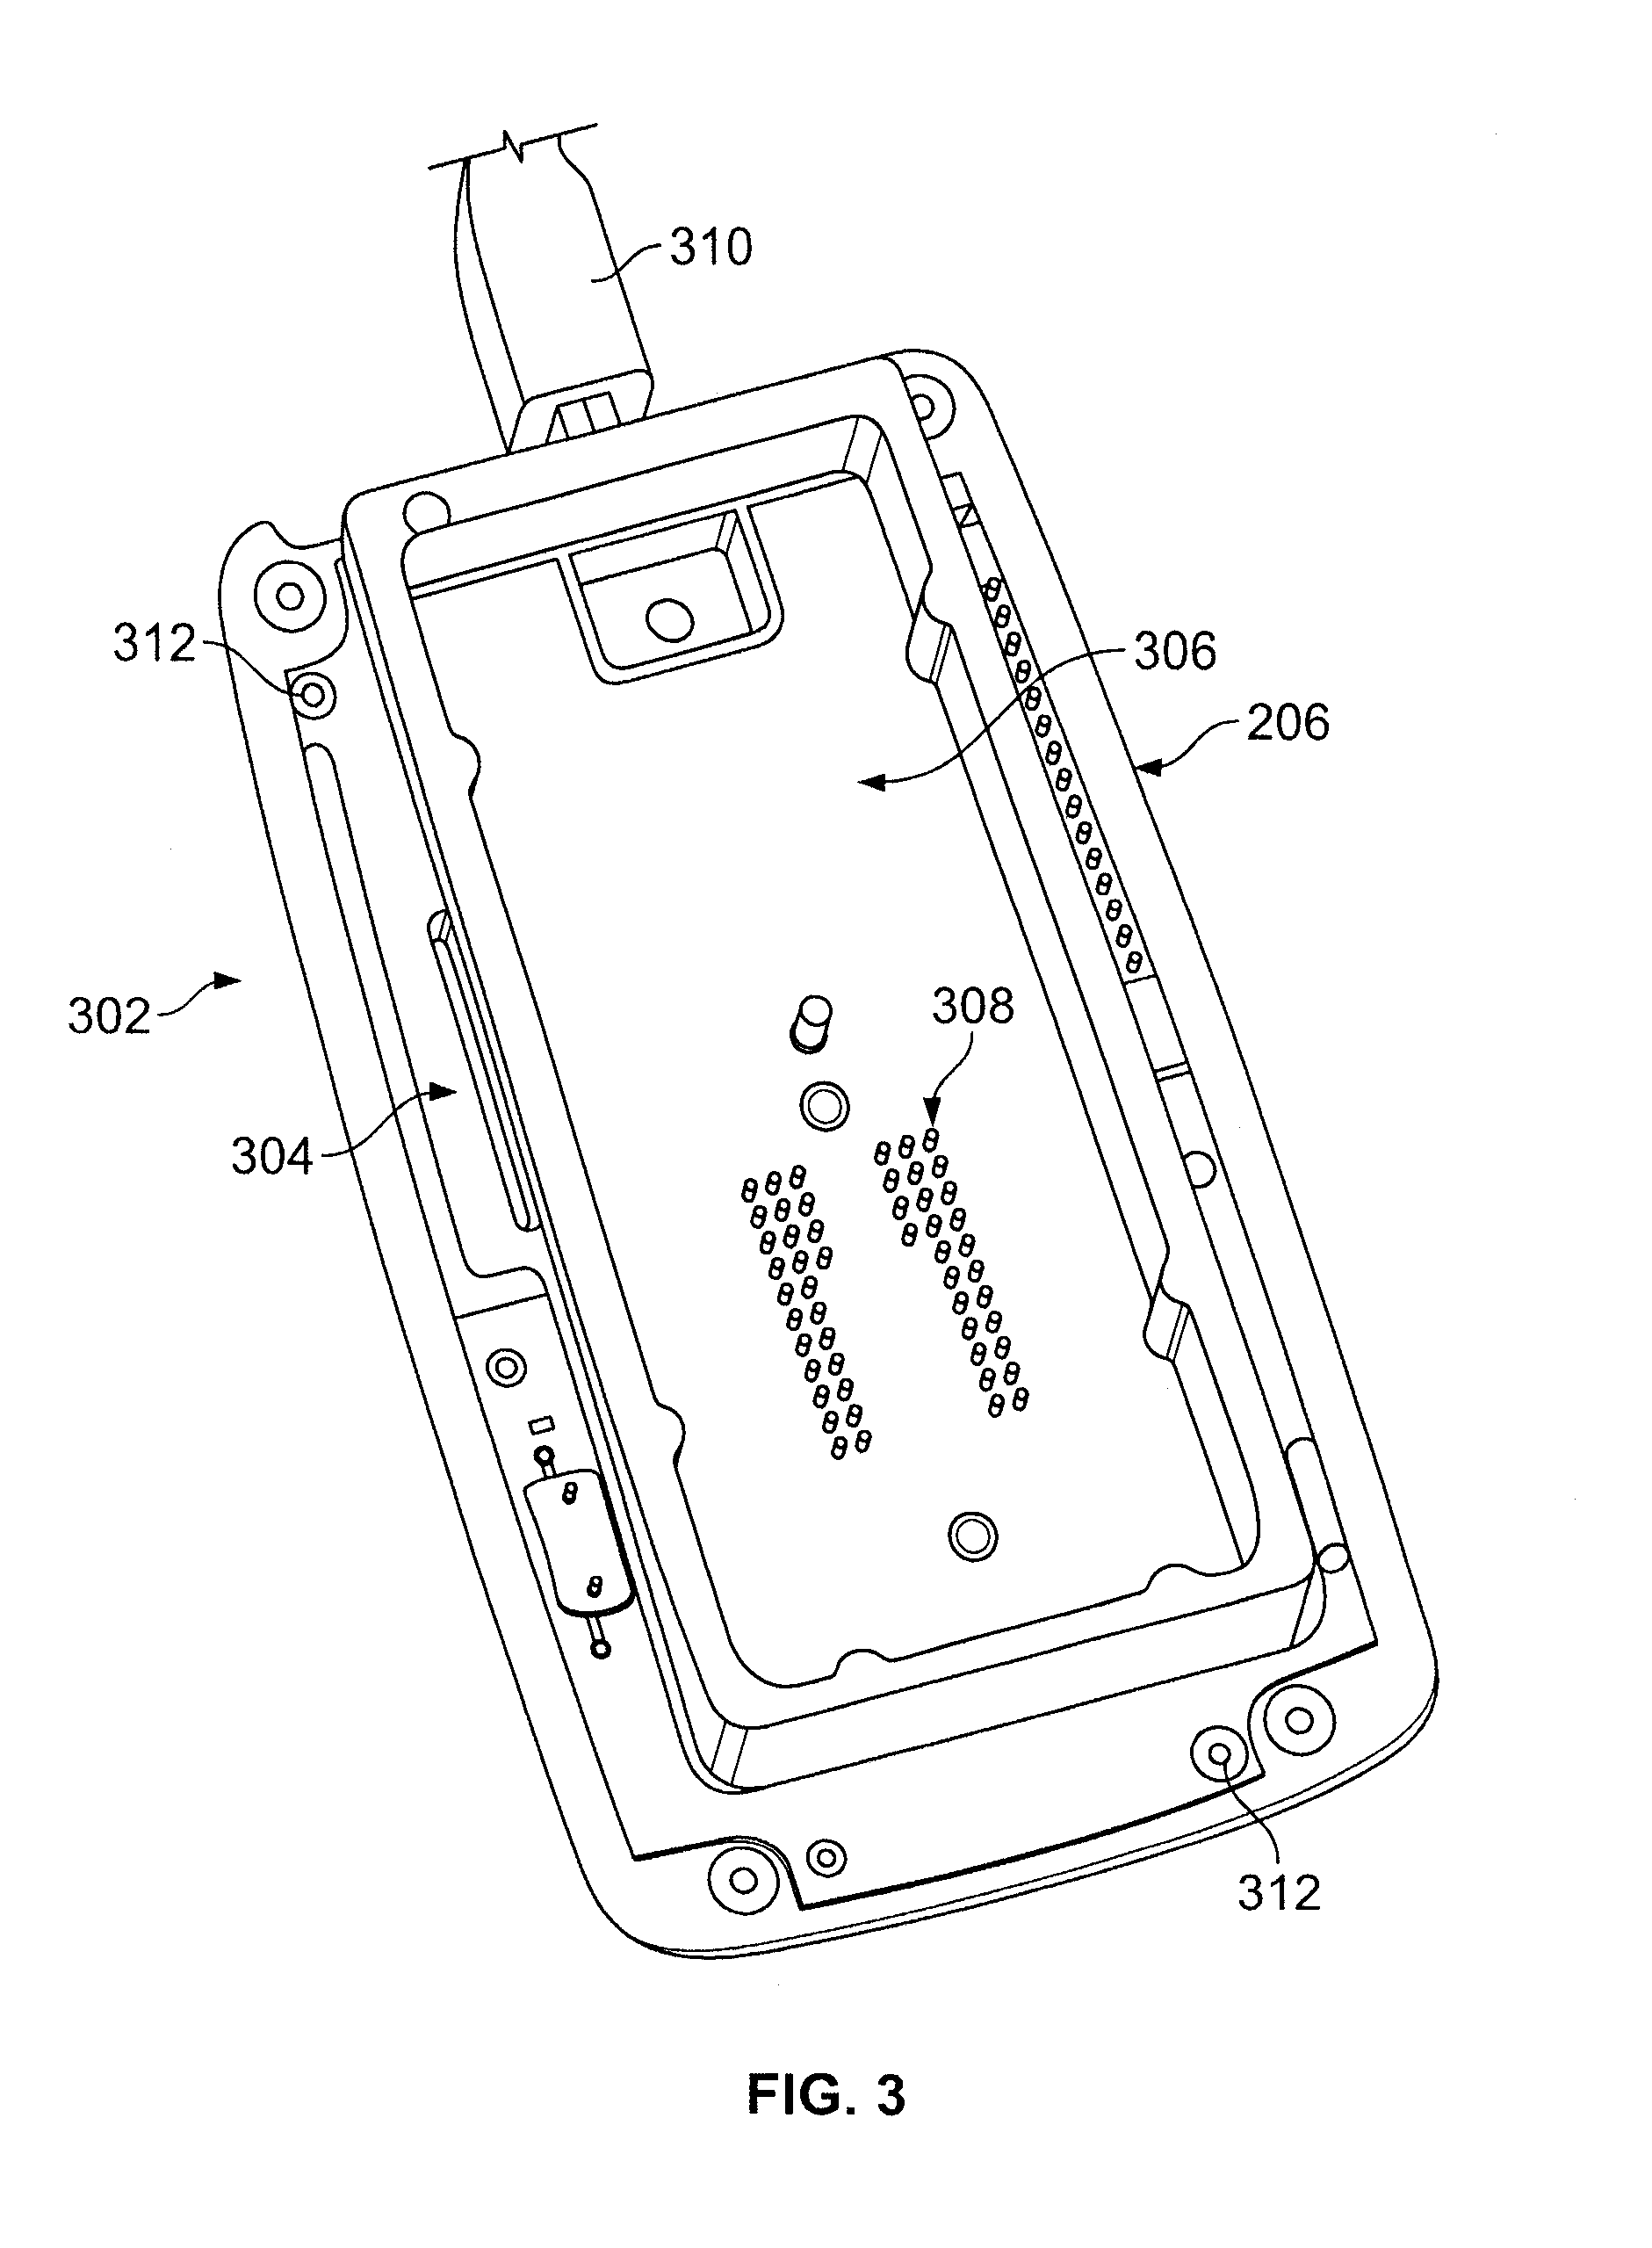 Method and Apparatus for a Printer Cartridge Tester